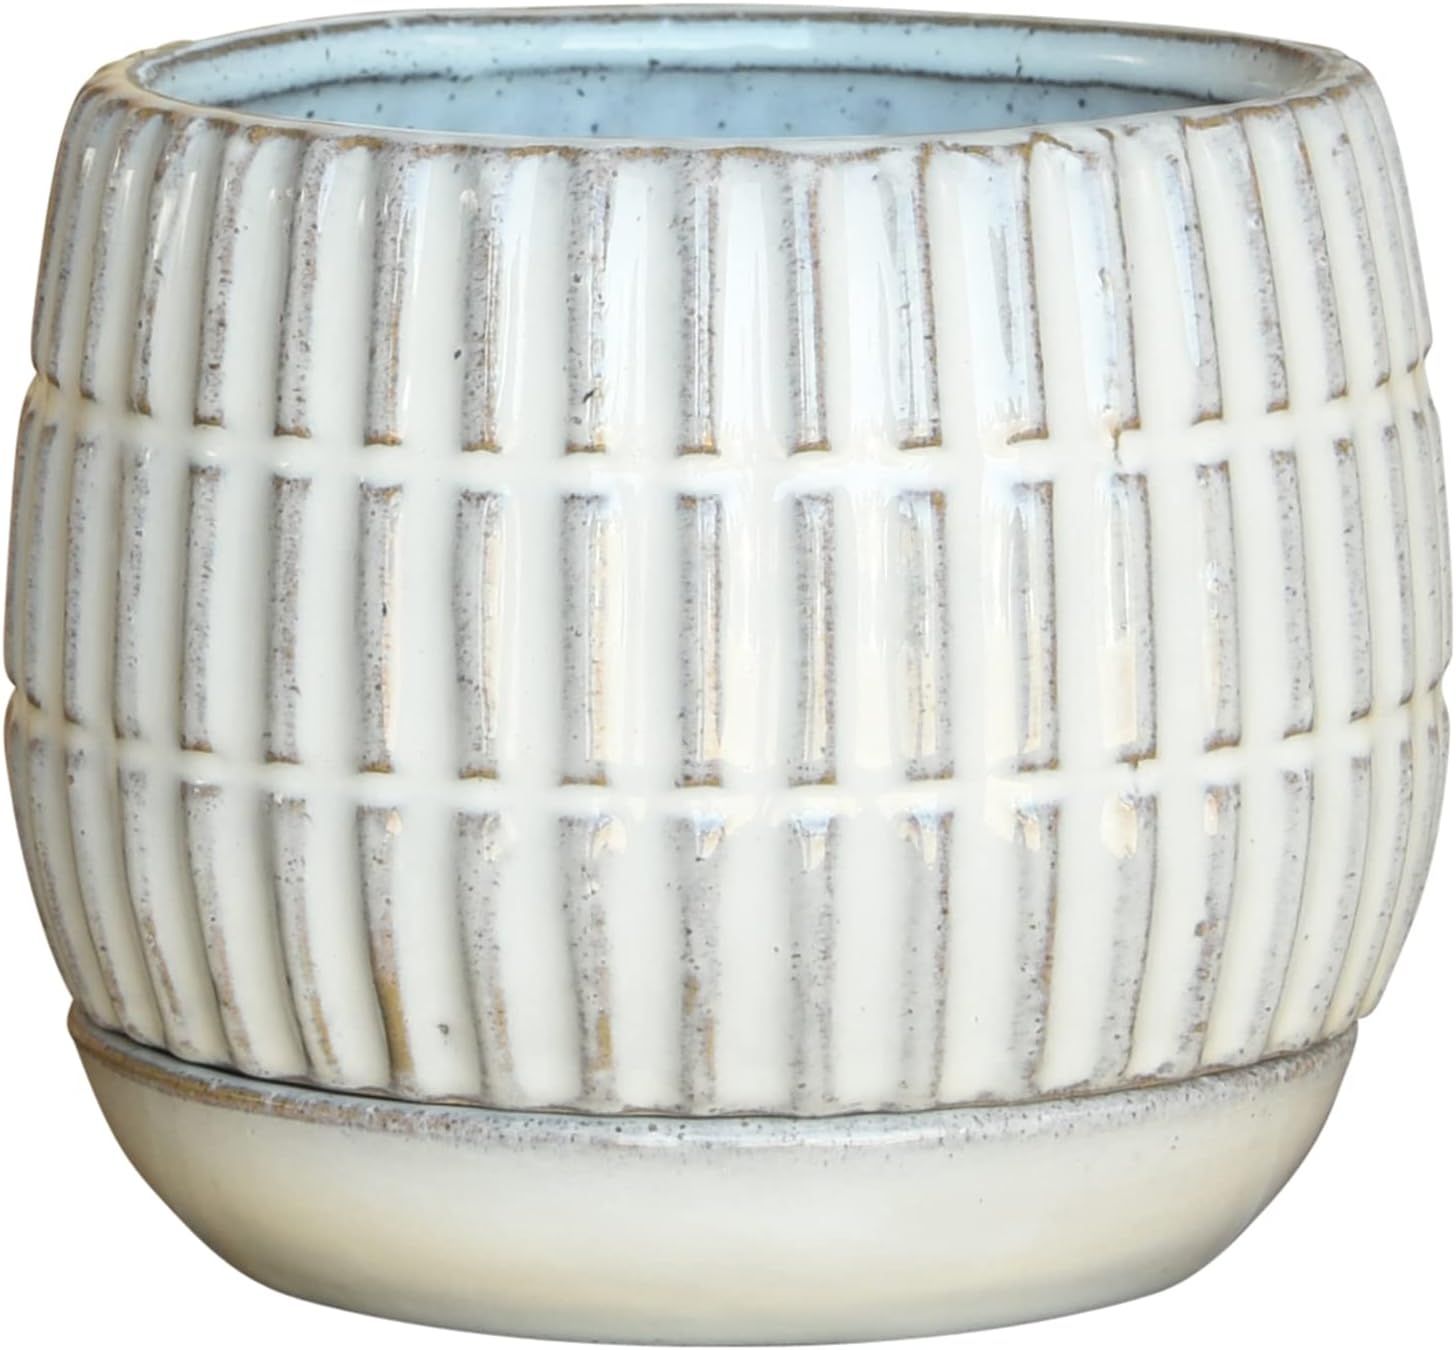 HomArt Ramos Stoneware Linear Cachepot with Saucer, 5-inch Length, Ceramic | Amazon (US)